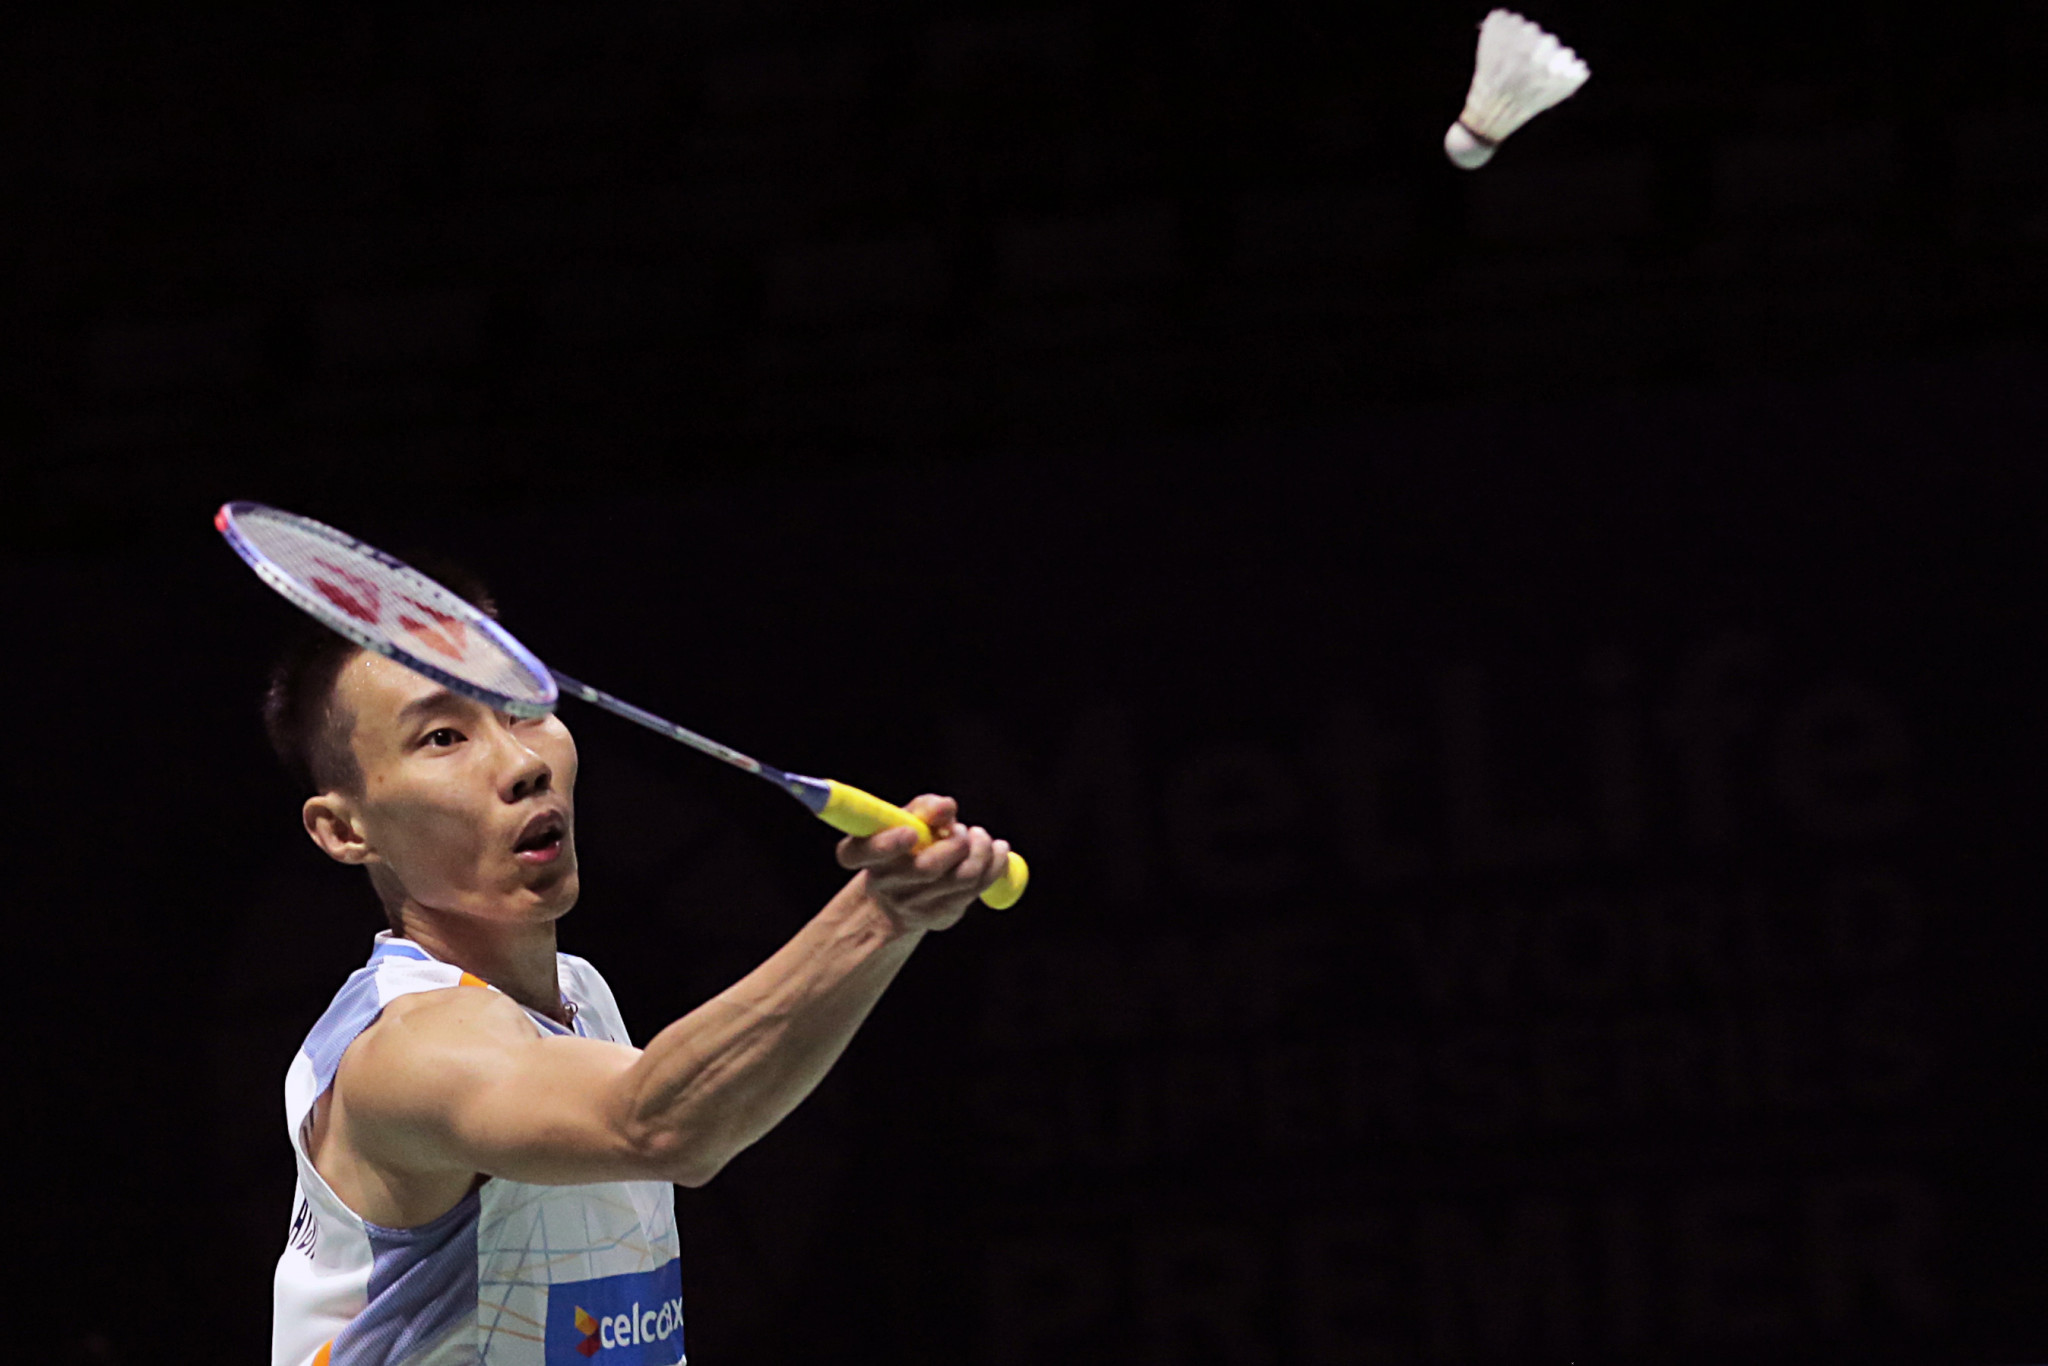 Lee Chong Wei earned a place in the men's singles quarter-finals ©Getty Images